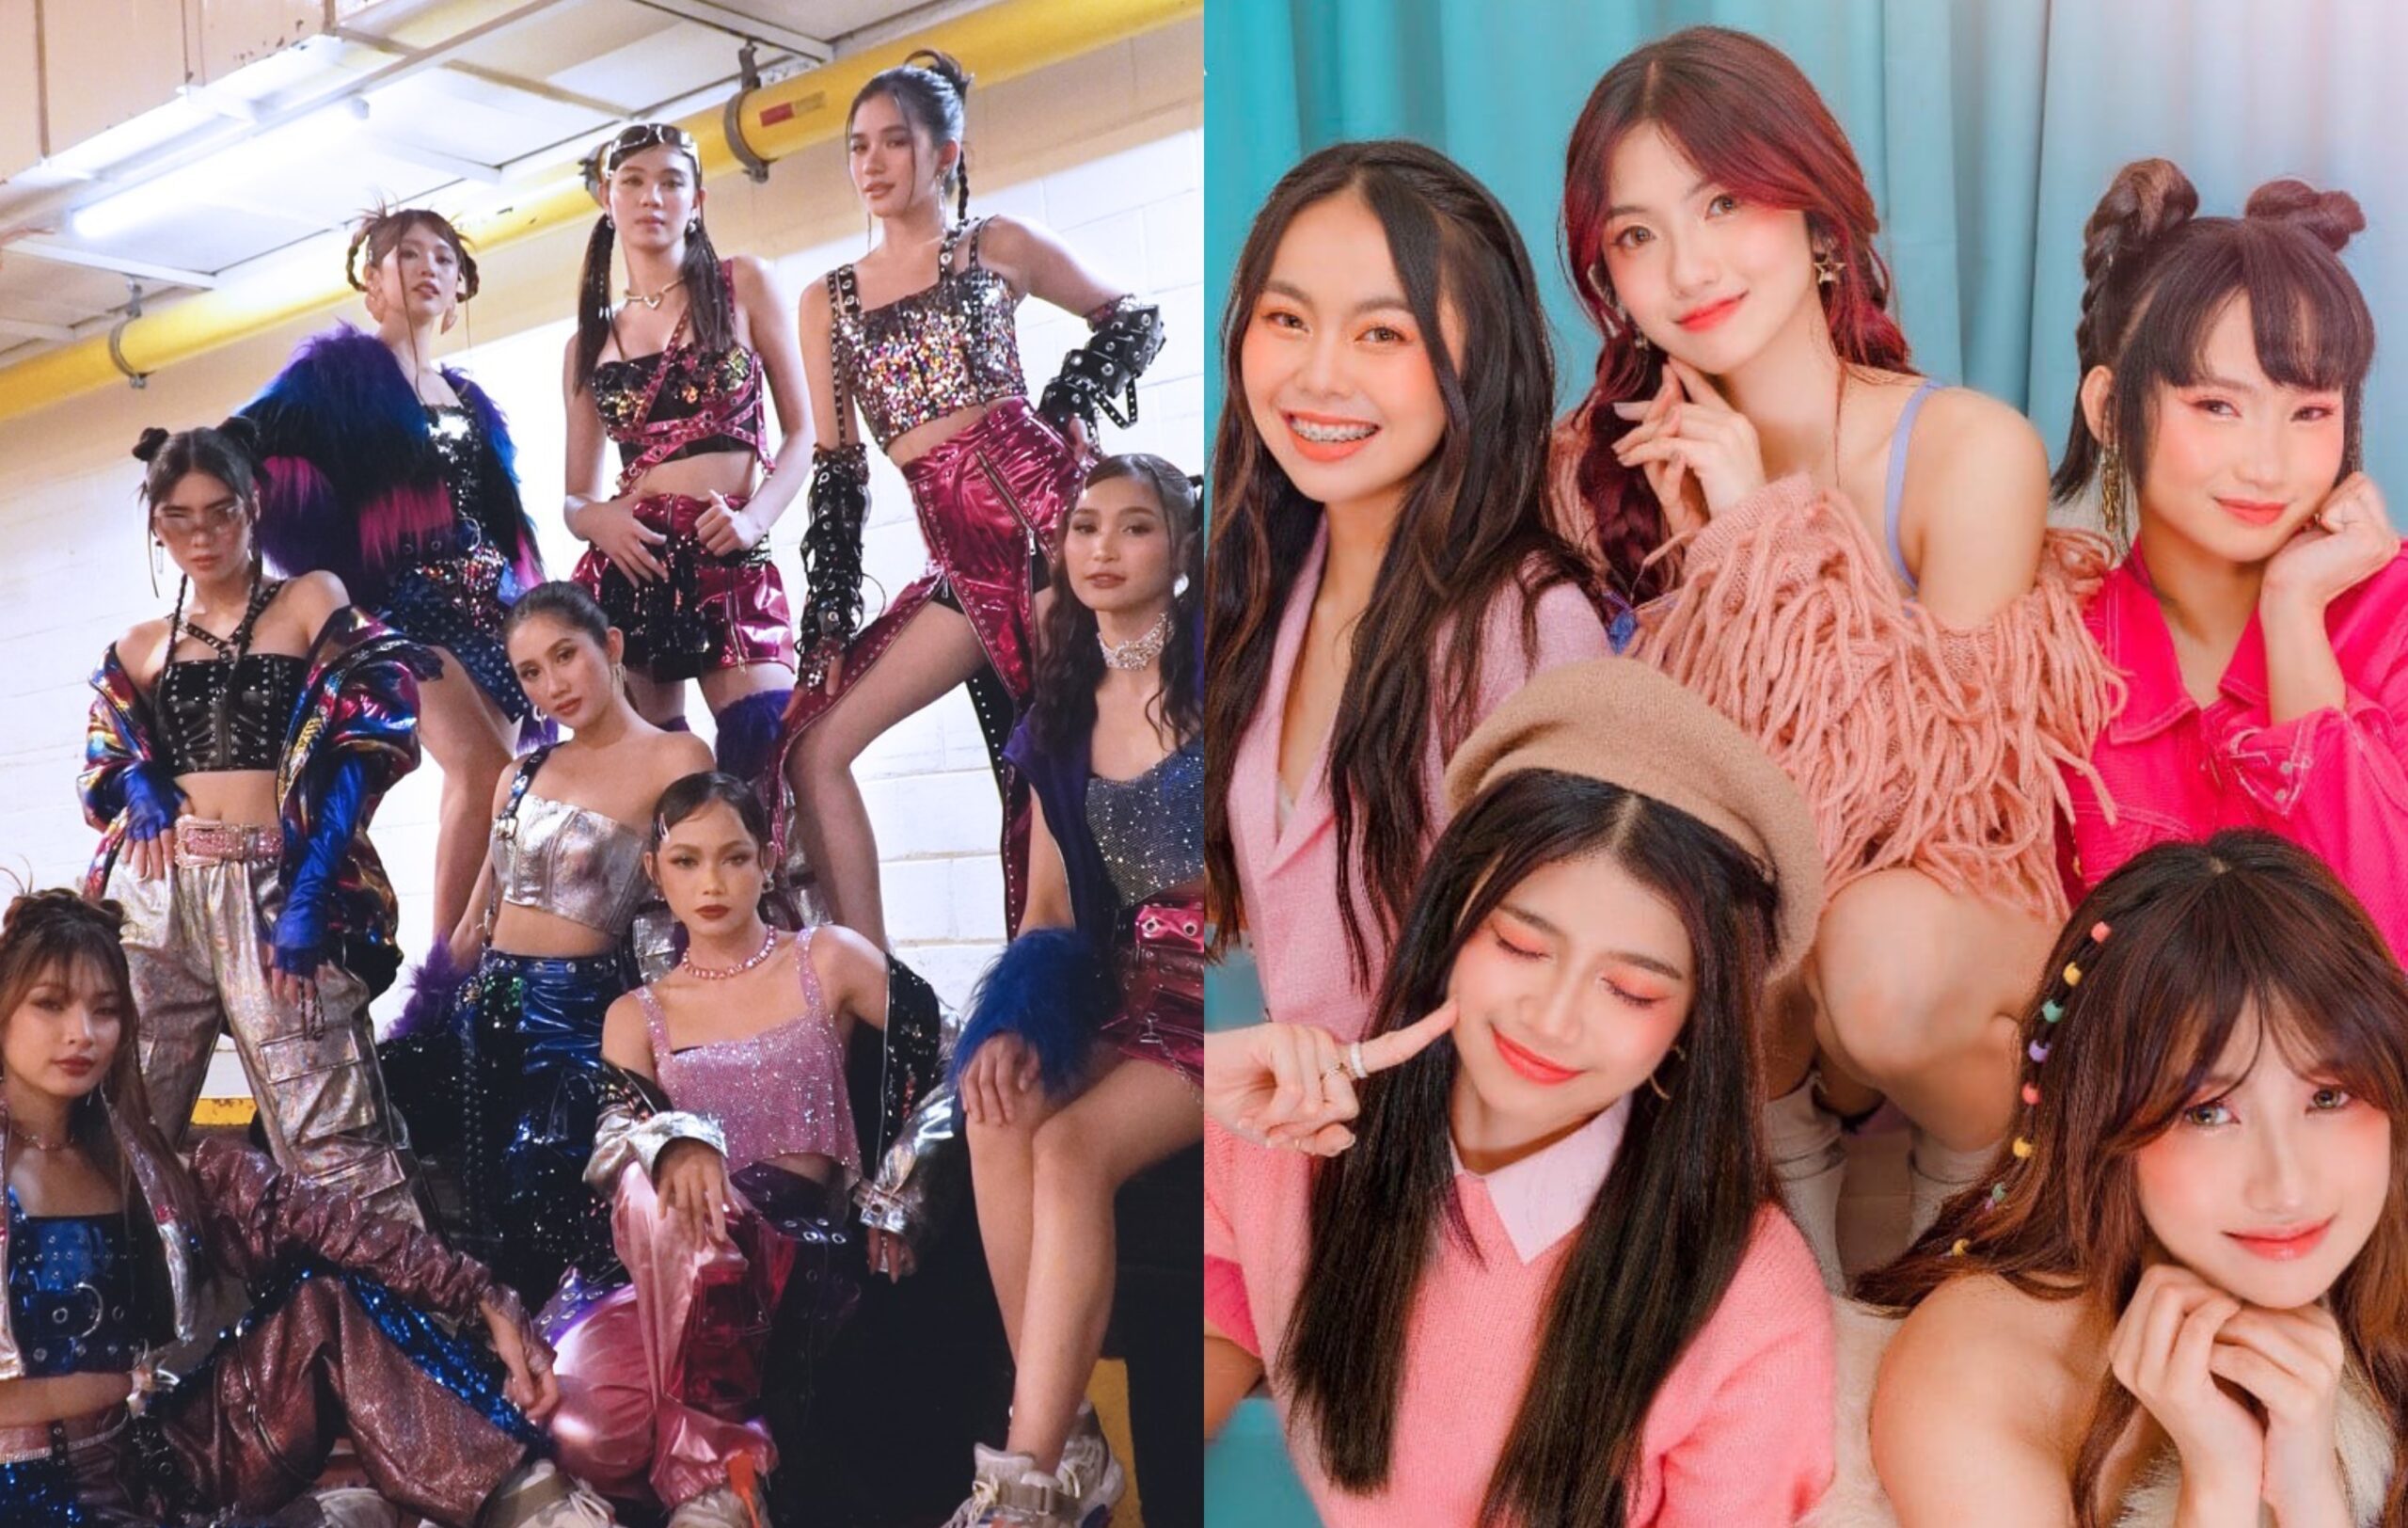 LOOK: BINI, KAIA part of MsMojo’s ‘international girl groups to add to your playlist’ 